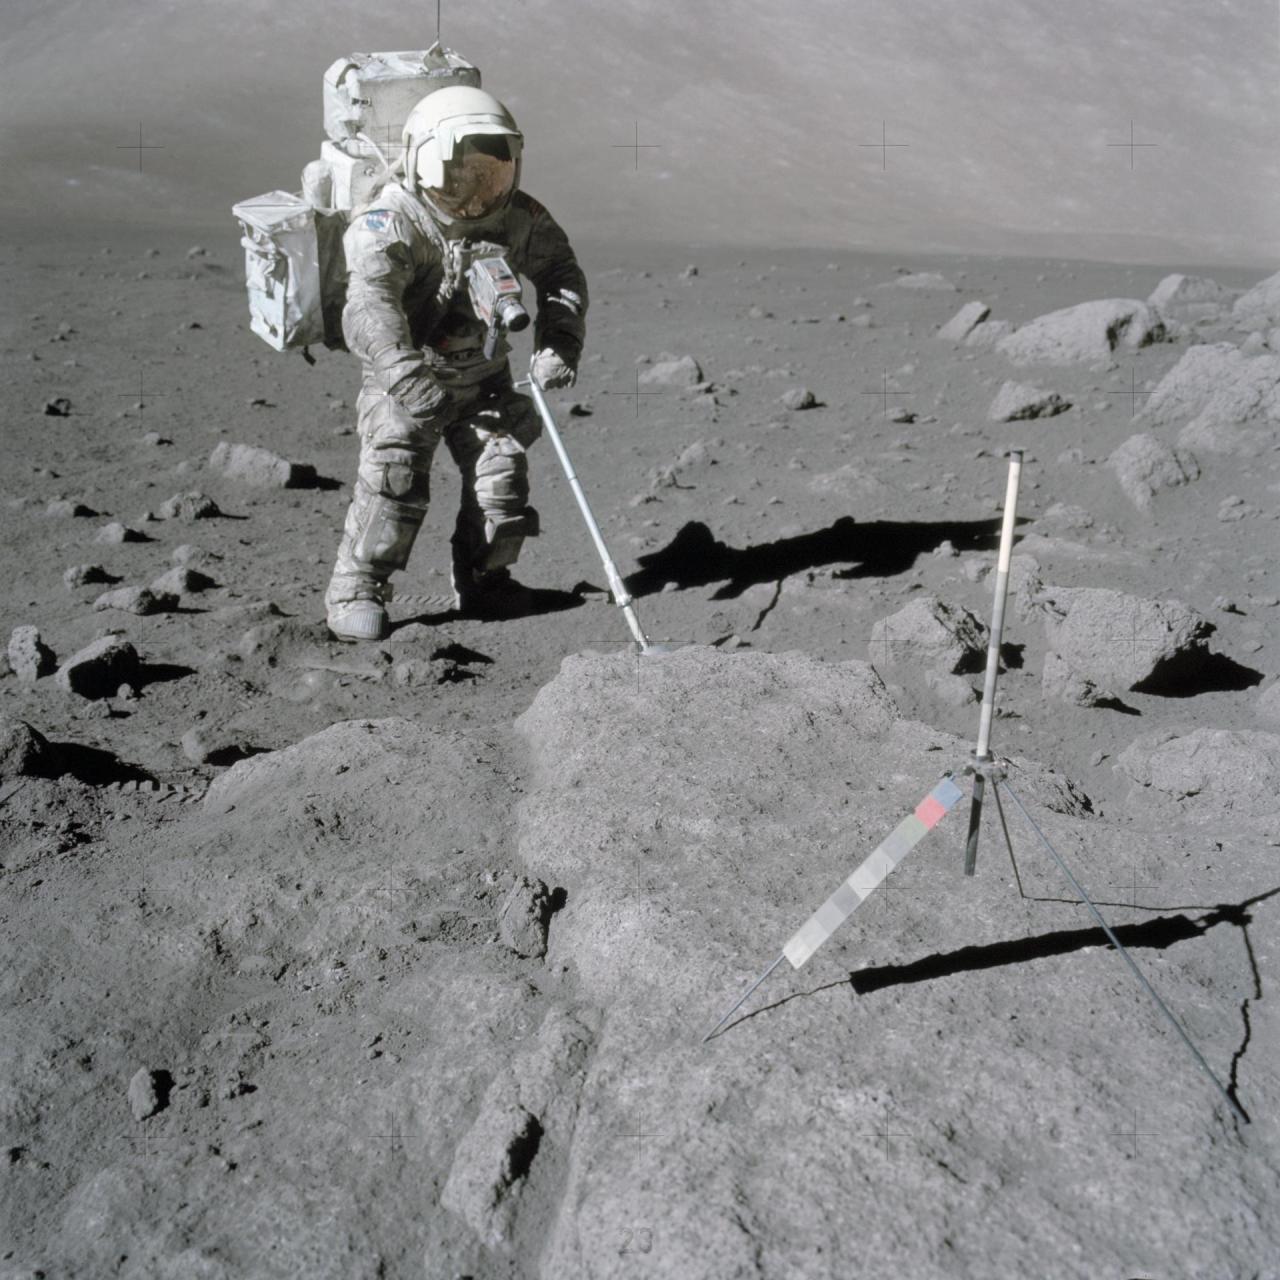 Scientist-astronaut Harrison Schmitt, Apollo 17 lunar module pilot, uses an adjustable sampling scoop to retrieve lunar samples during the second Apollo 17 extravehicular activity (EVA), at Station 5 at the Taurus-Littrow landing site. A gnomon is atop the large rock in the foreground. The gnomon is a stadia rod mounted on a tripod, and serves as an indicator of the gravitational vector and provides accurate vertical reference and calibrated length for determining size and position of objects in near-field photographs. The color scale of blue, orange and green is used to accurately determine color for photography. Credit: NASA